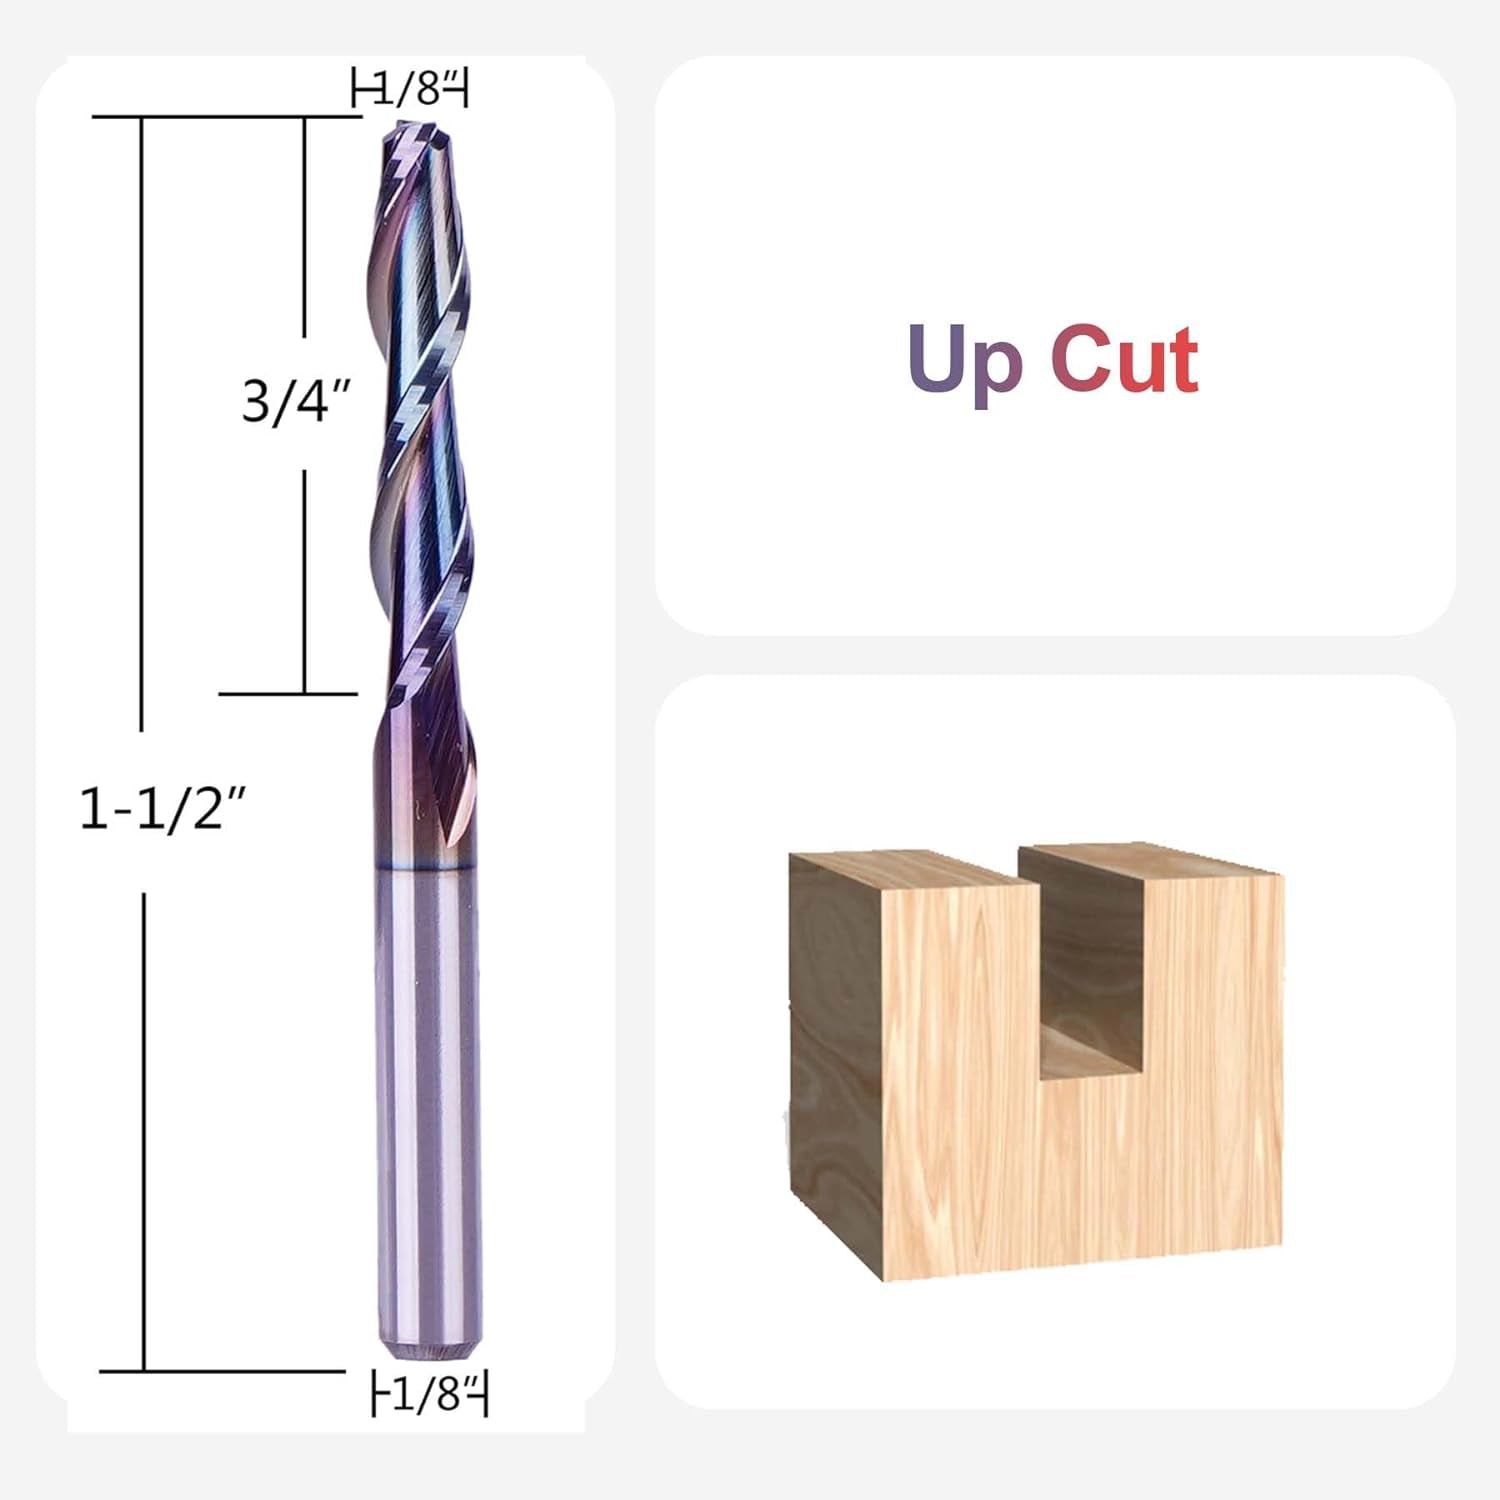 SpeTool Long Life Coated 1/8 Inch Dia Spiral Up Cut CNC Router Bit